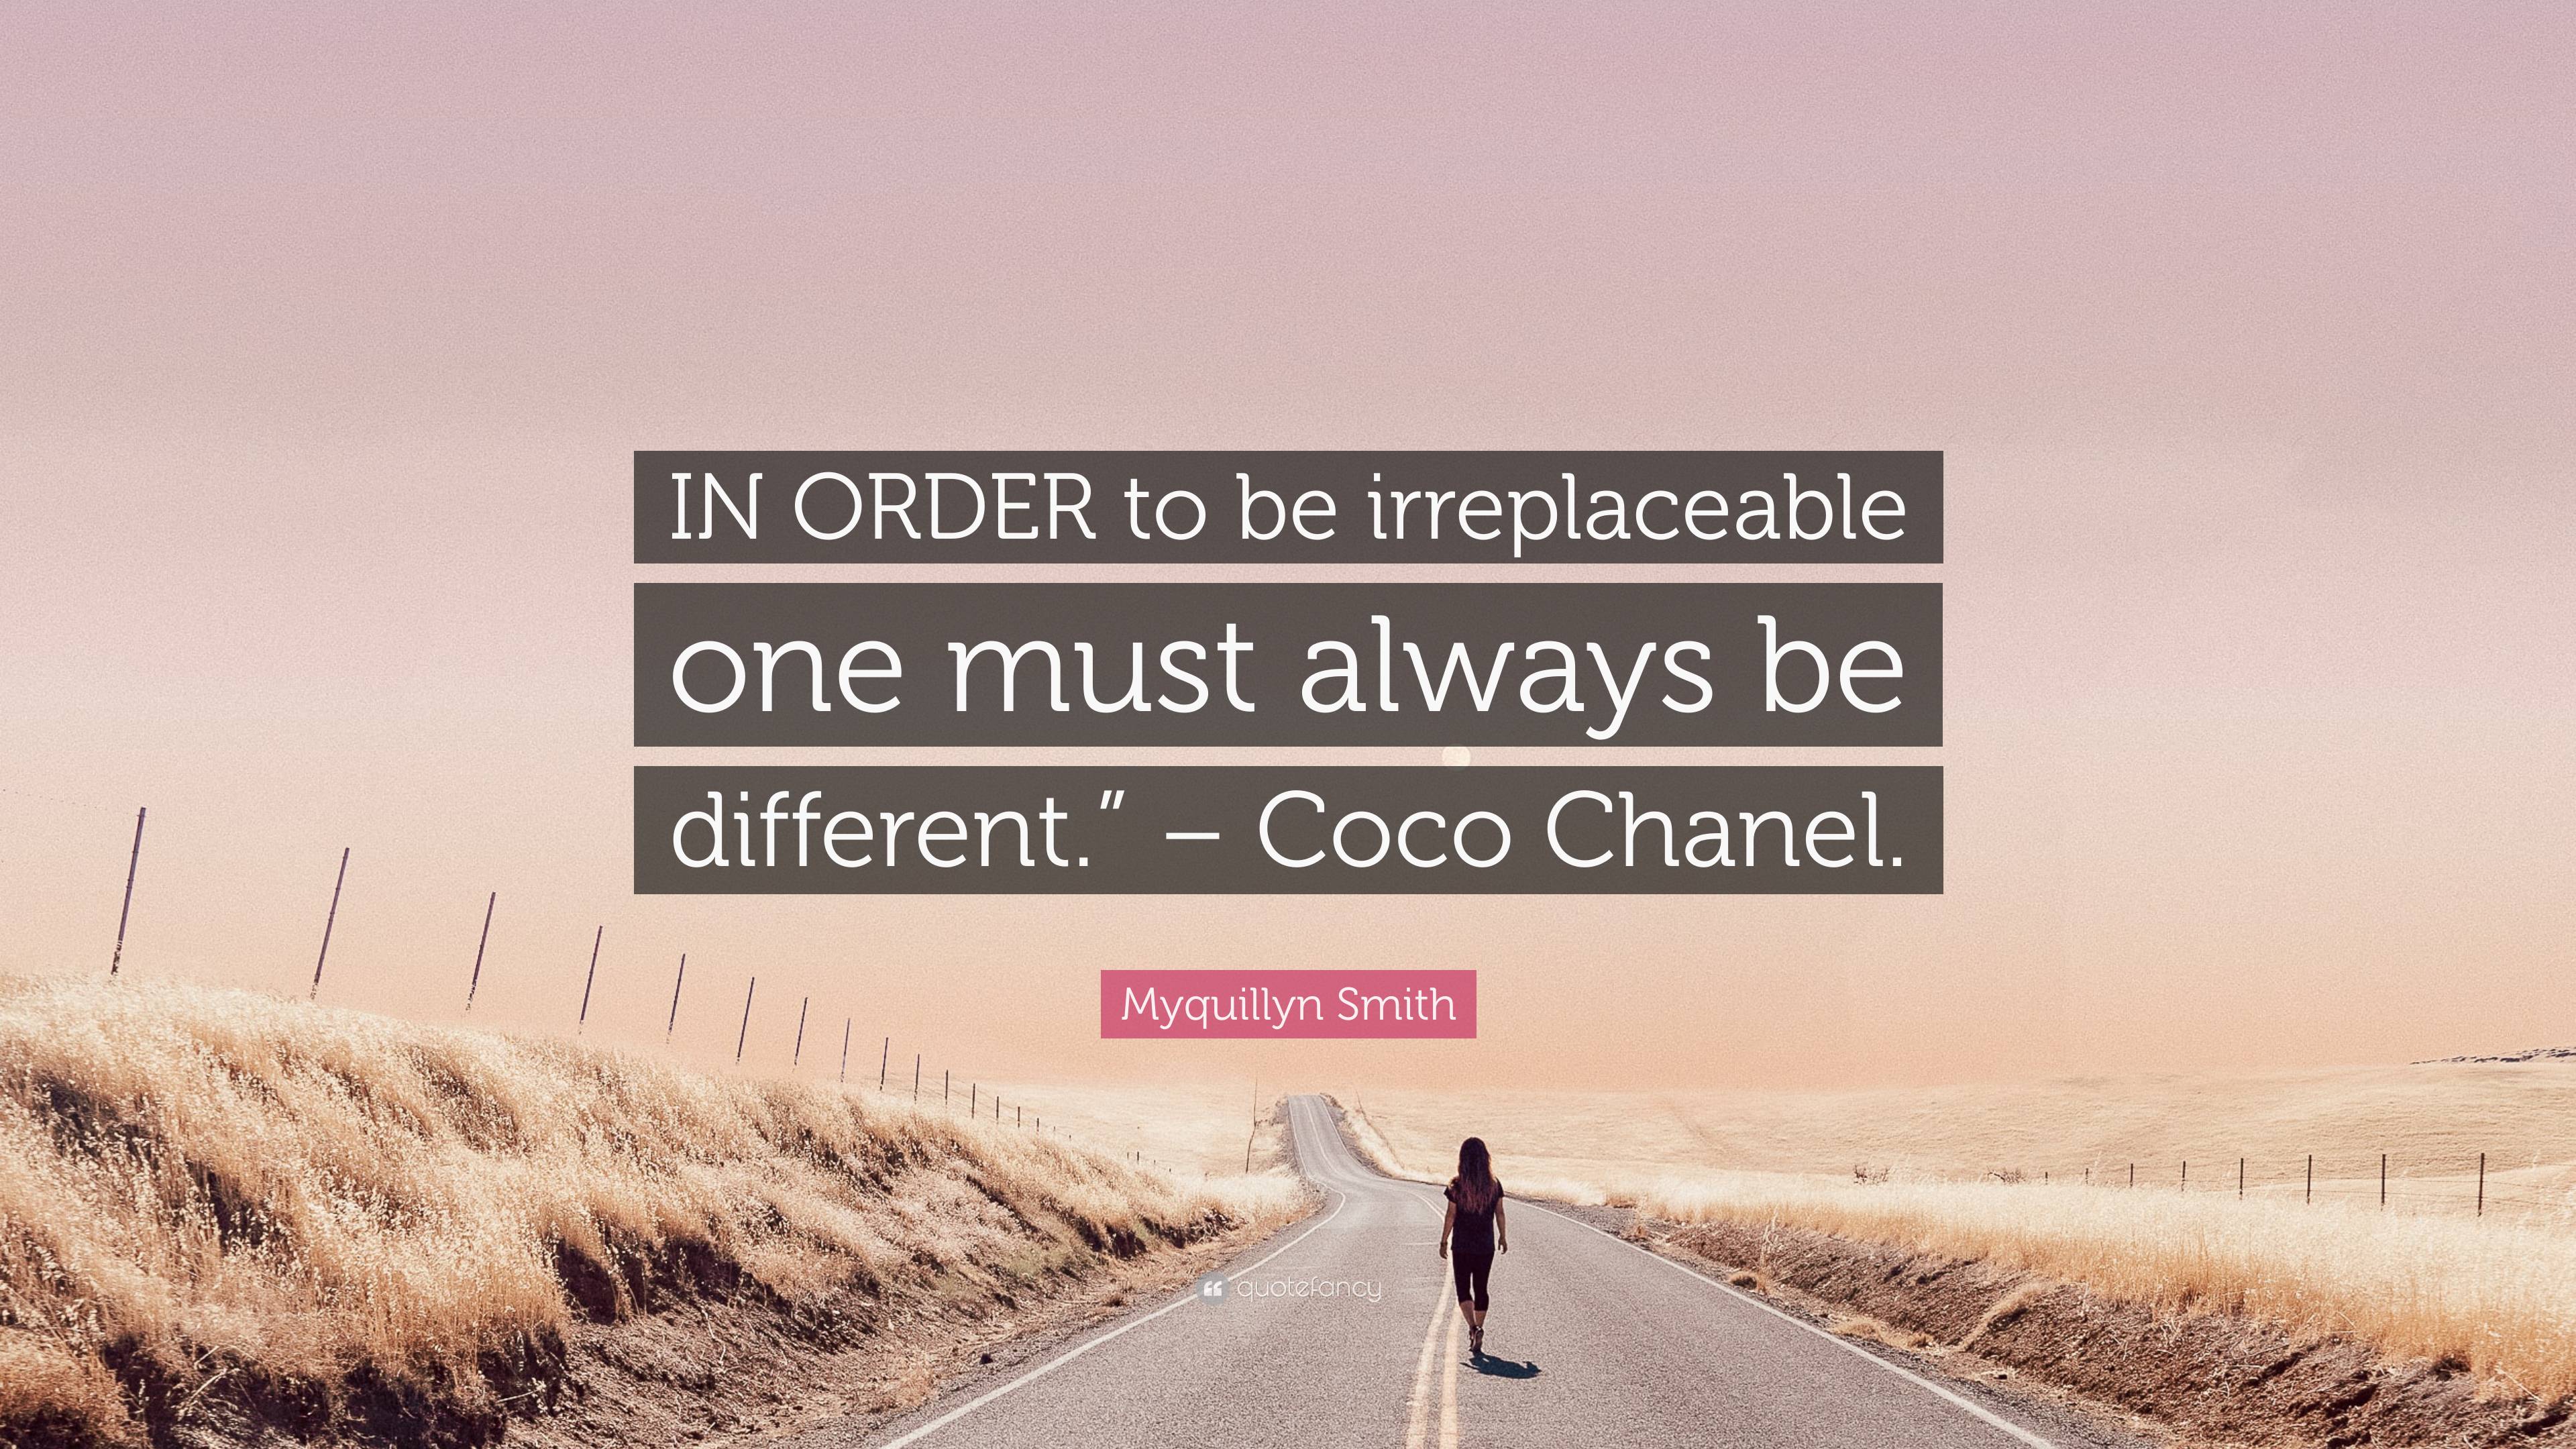 In the words of Mademoiselle Chanel: “In order to be irreplaceable, one  must always be different”